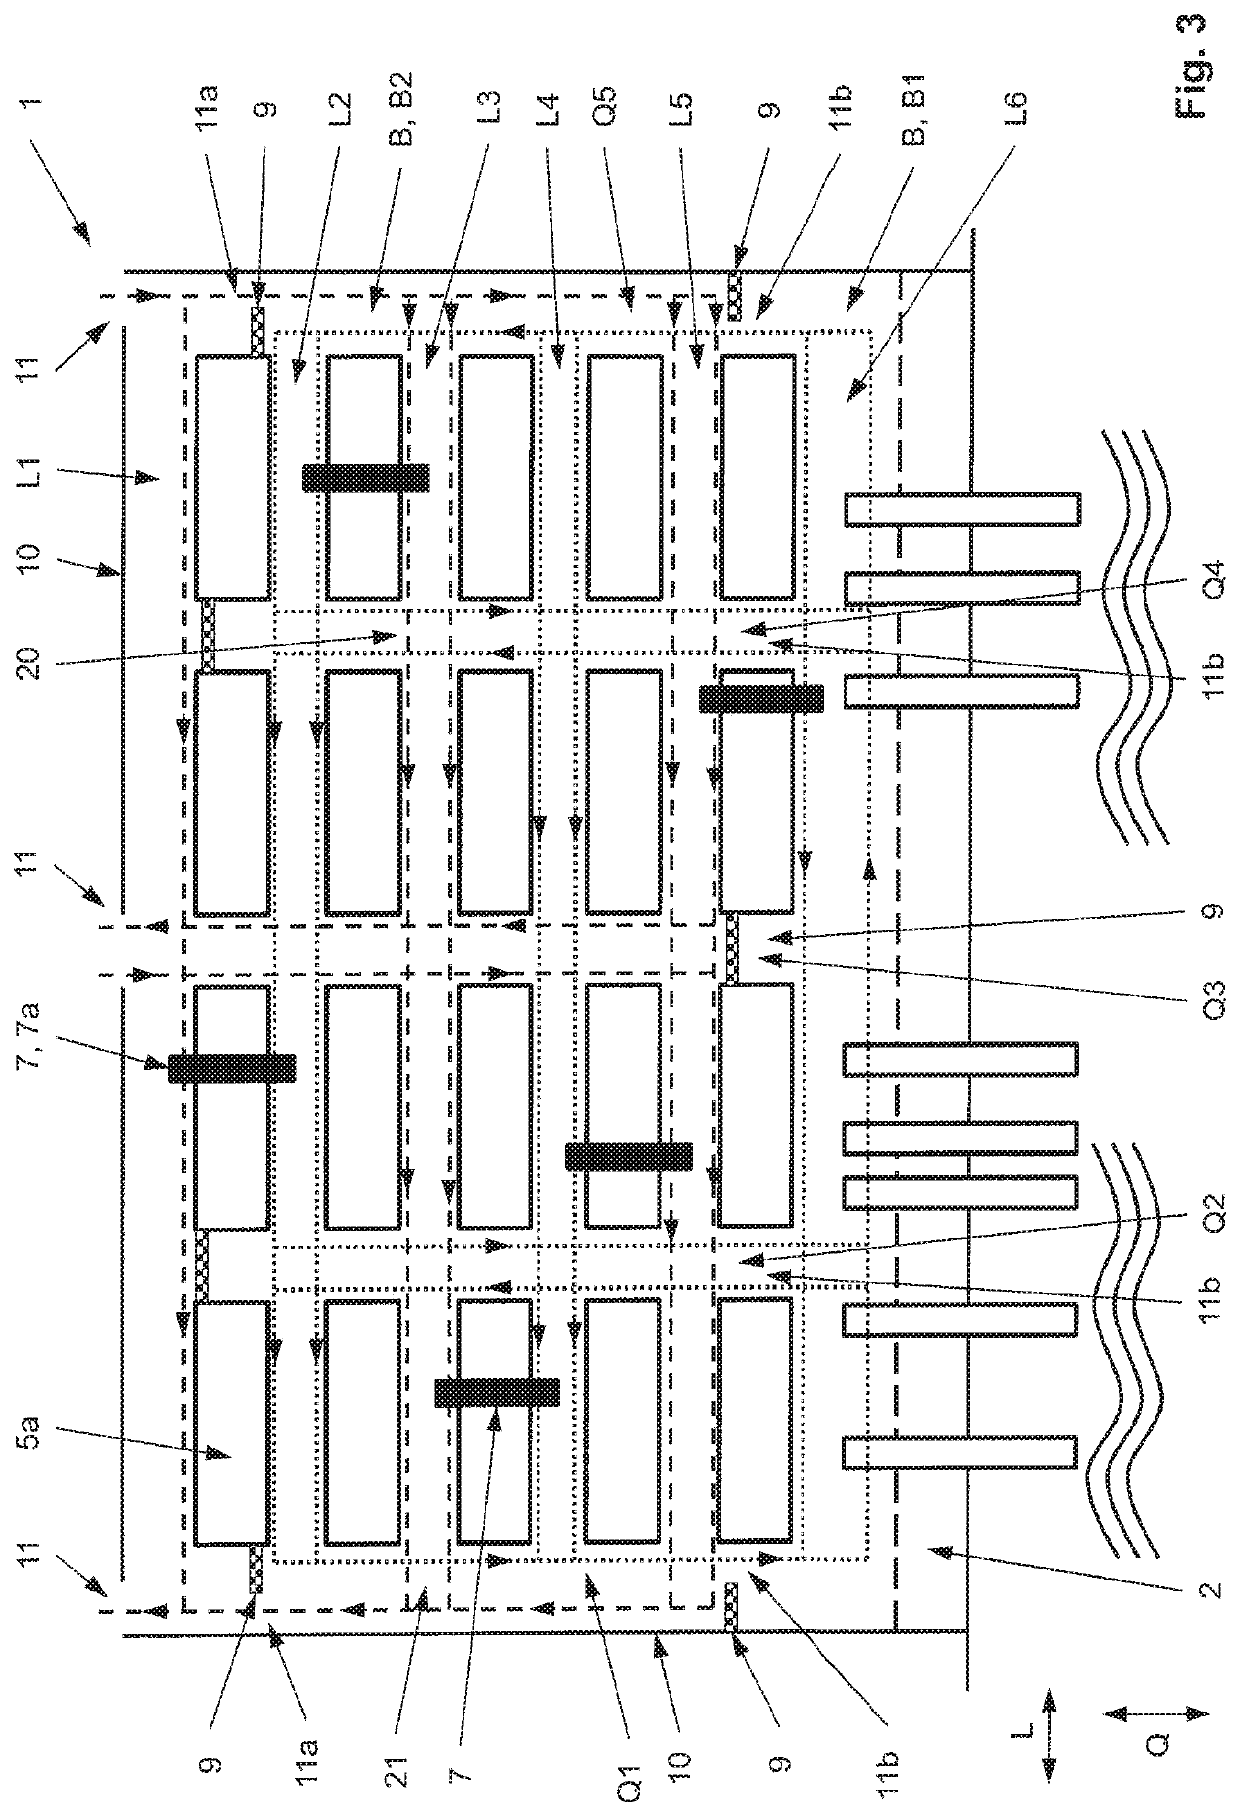 System for transporting containers using automated and manually driven heavy goods vehicles